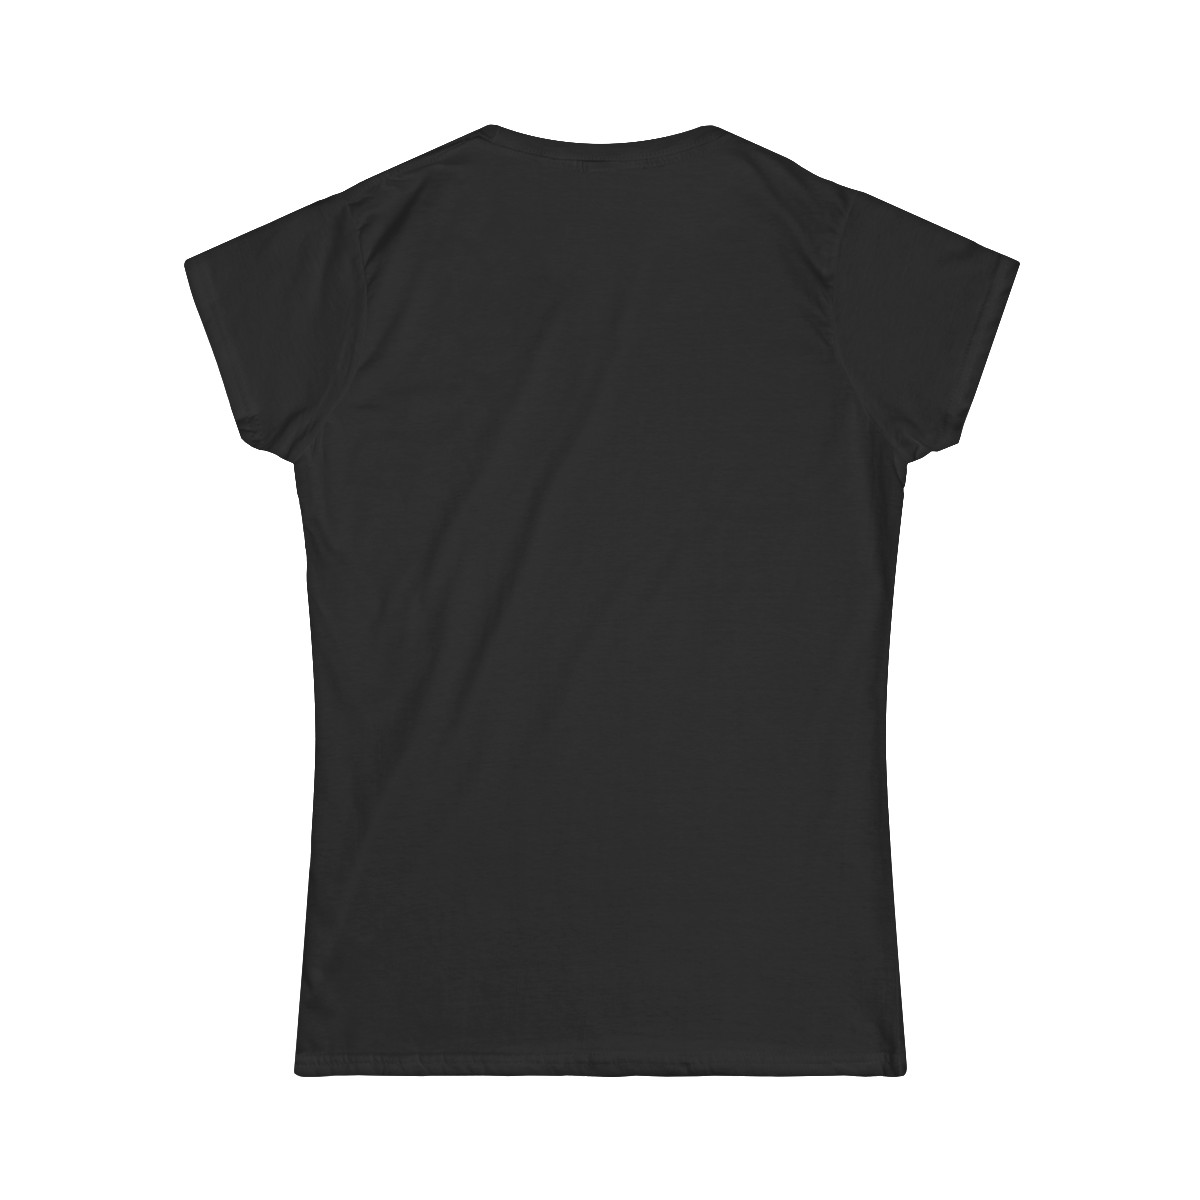 Sun Wave - Women's Softstyle Tee: White Ink product thumbnail image